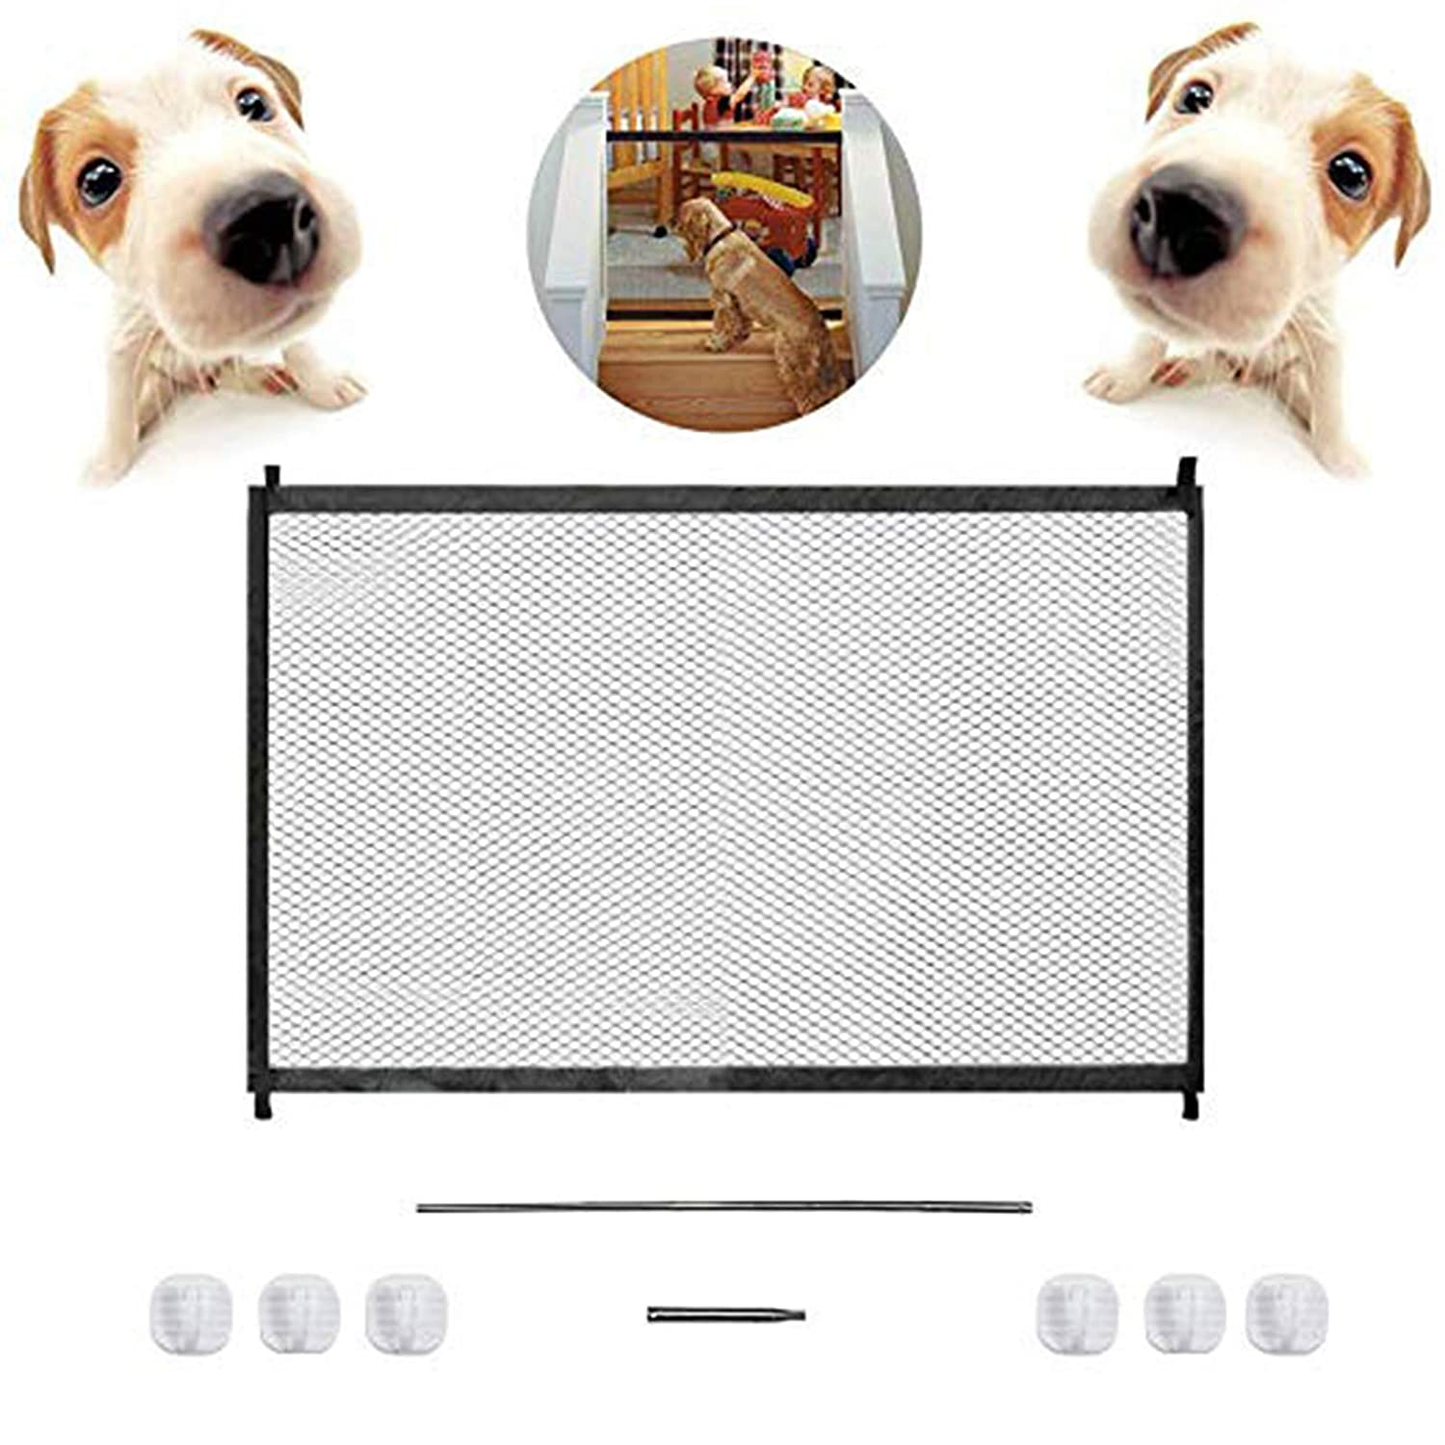 43.3"X28.3"Dog Gate,Pet Gate,Baby Gate,Magic Gate Portable Folding Mesh Gate Safe Guard Isolated Gauze Indoor and Outdoor Safety Gate Install Anywhere for Dogs